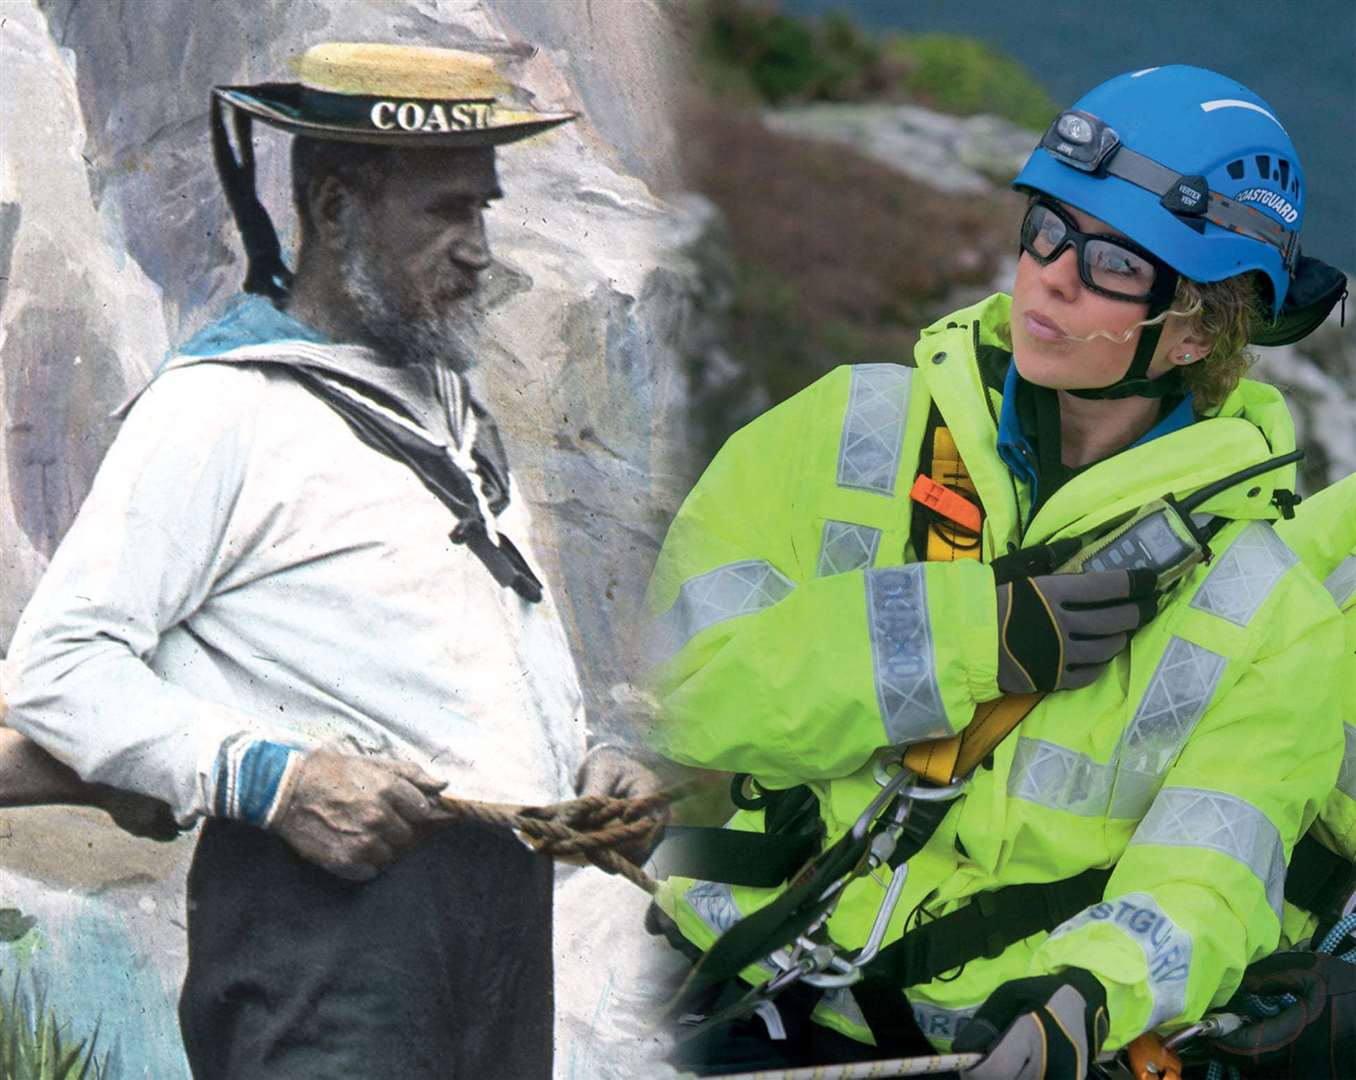 How times have changed during the past 200 years for the Coastguards